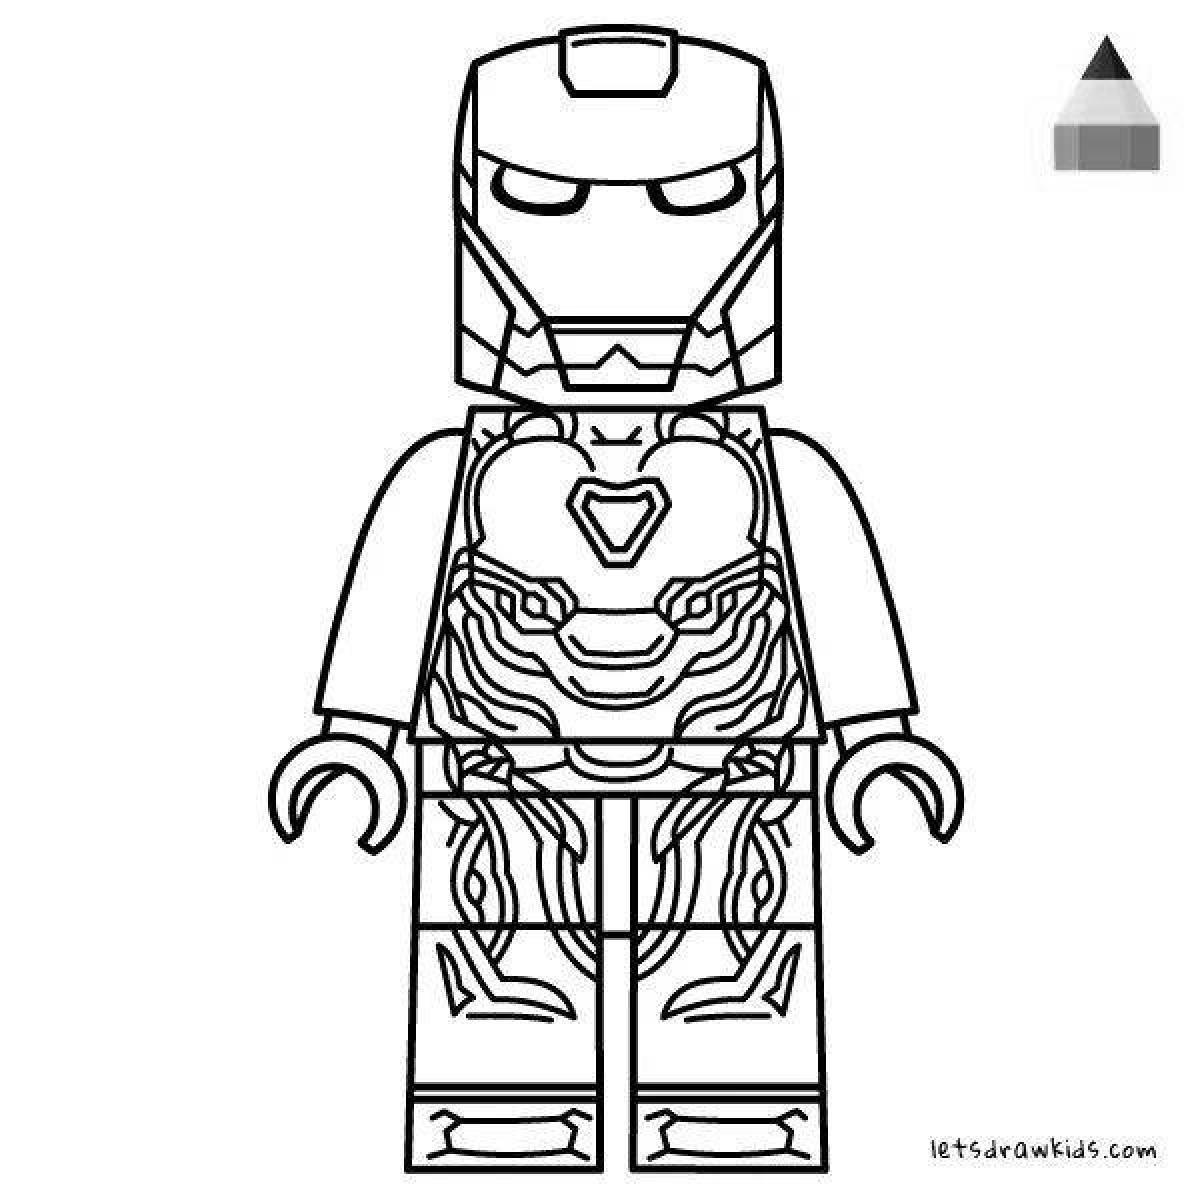 Color madness lego man coloring page